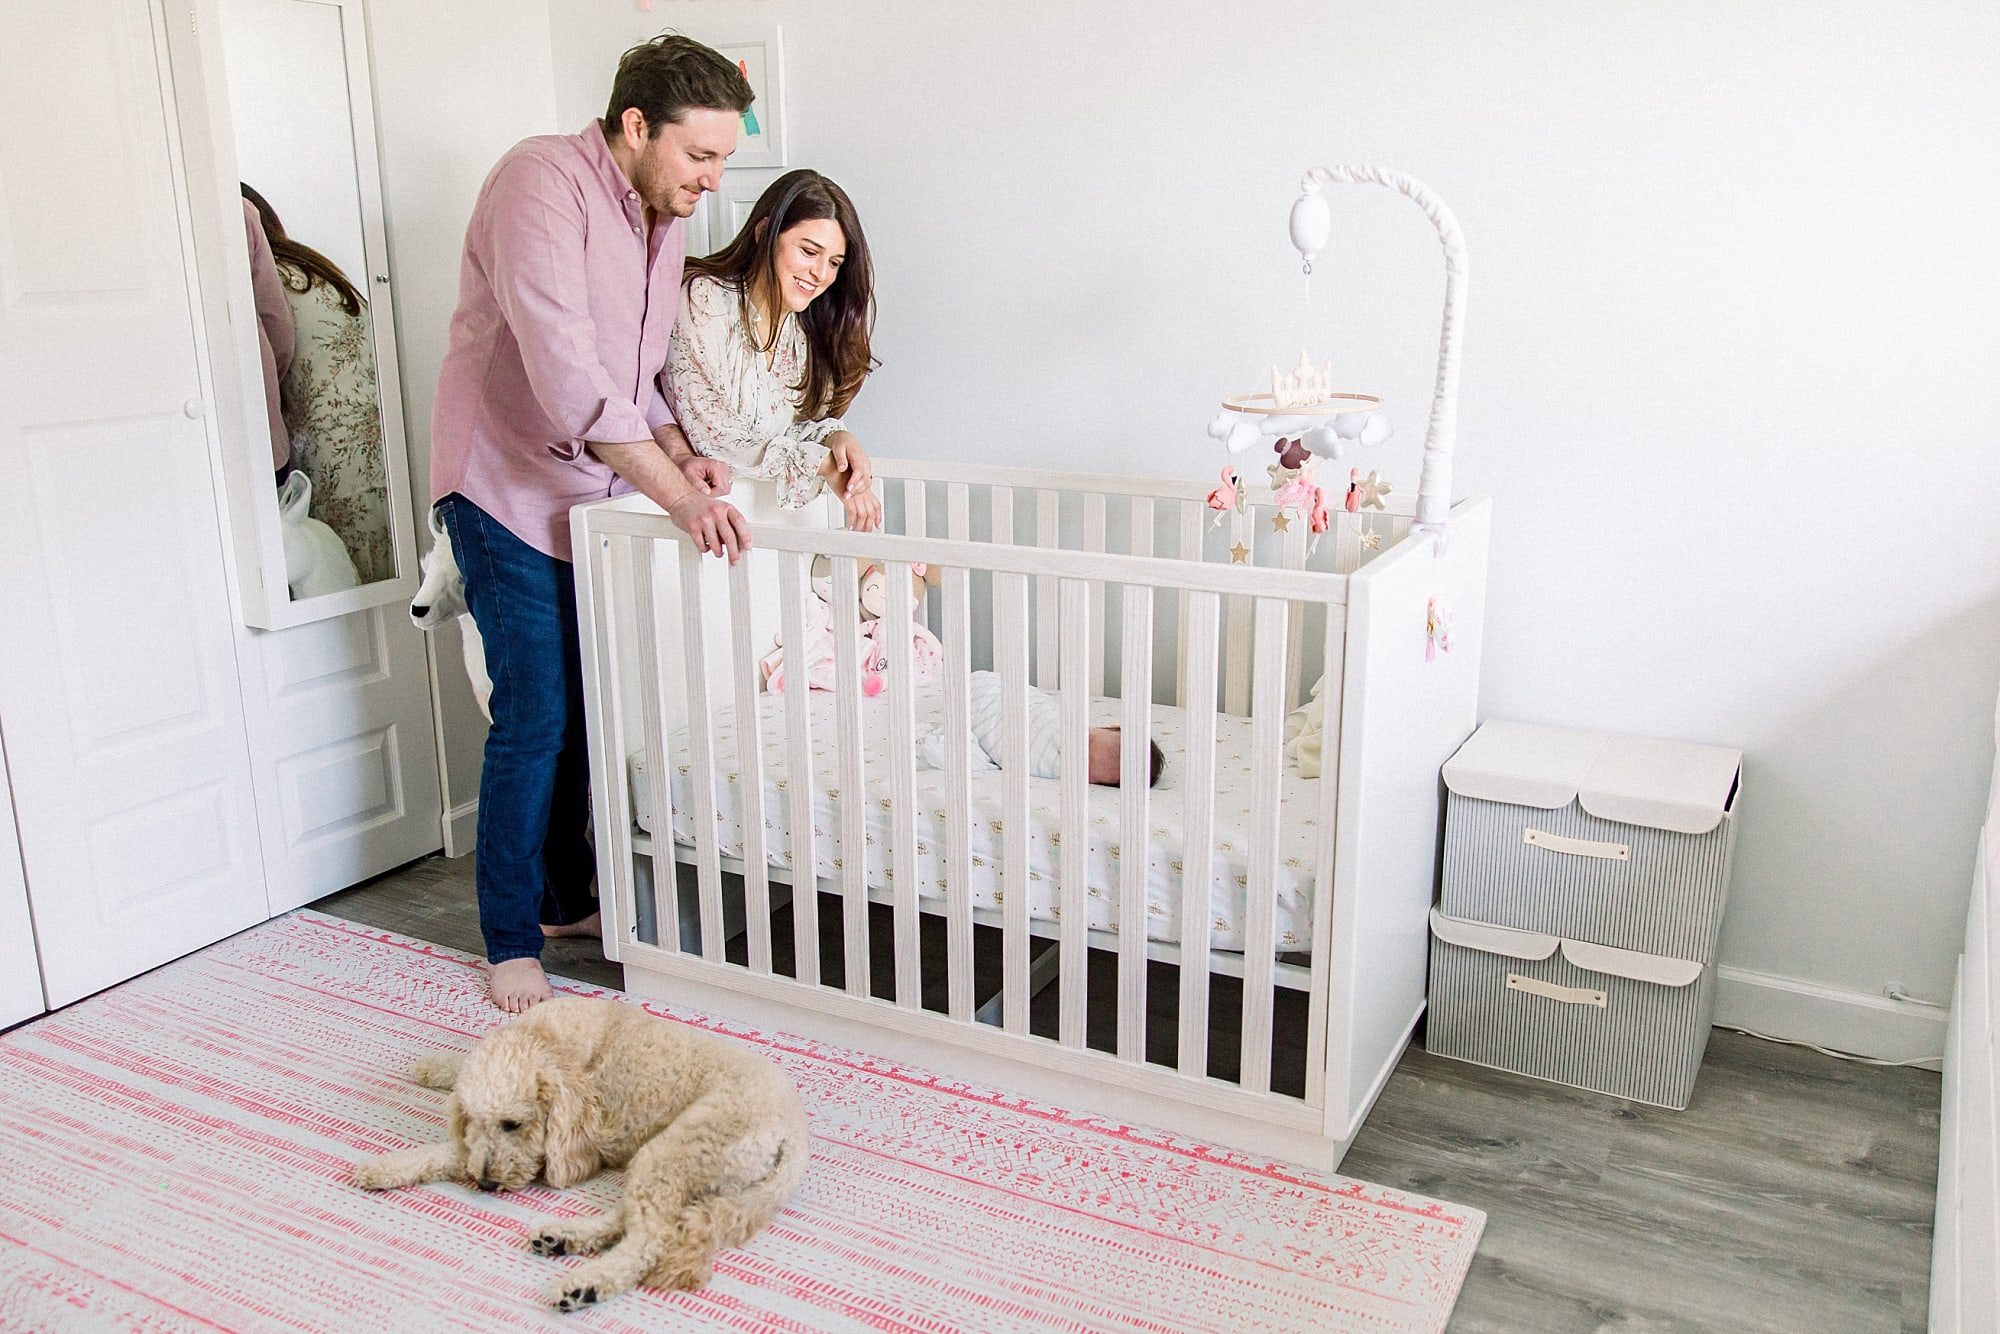 Boca Raton Newborn photography session in home with dog